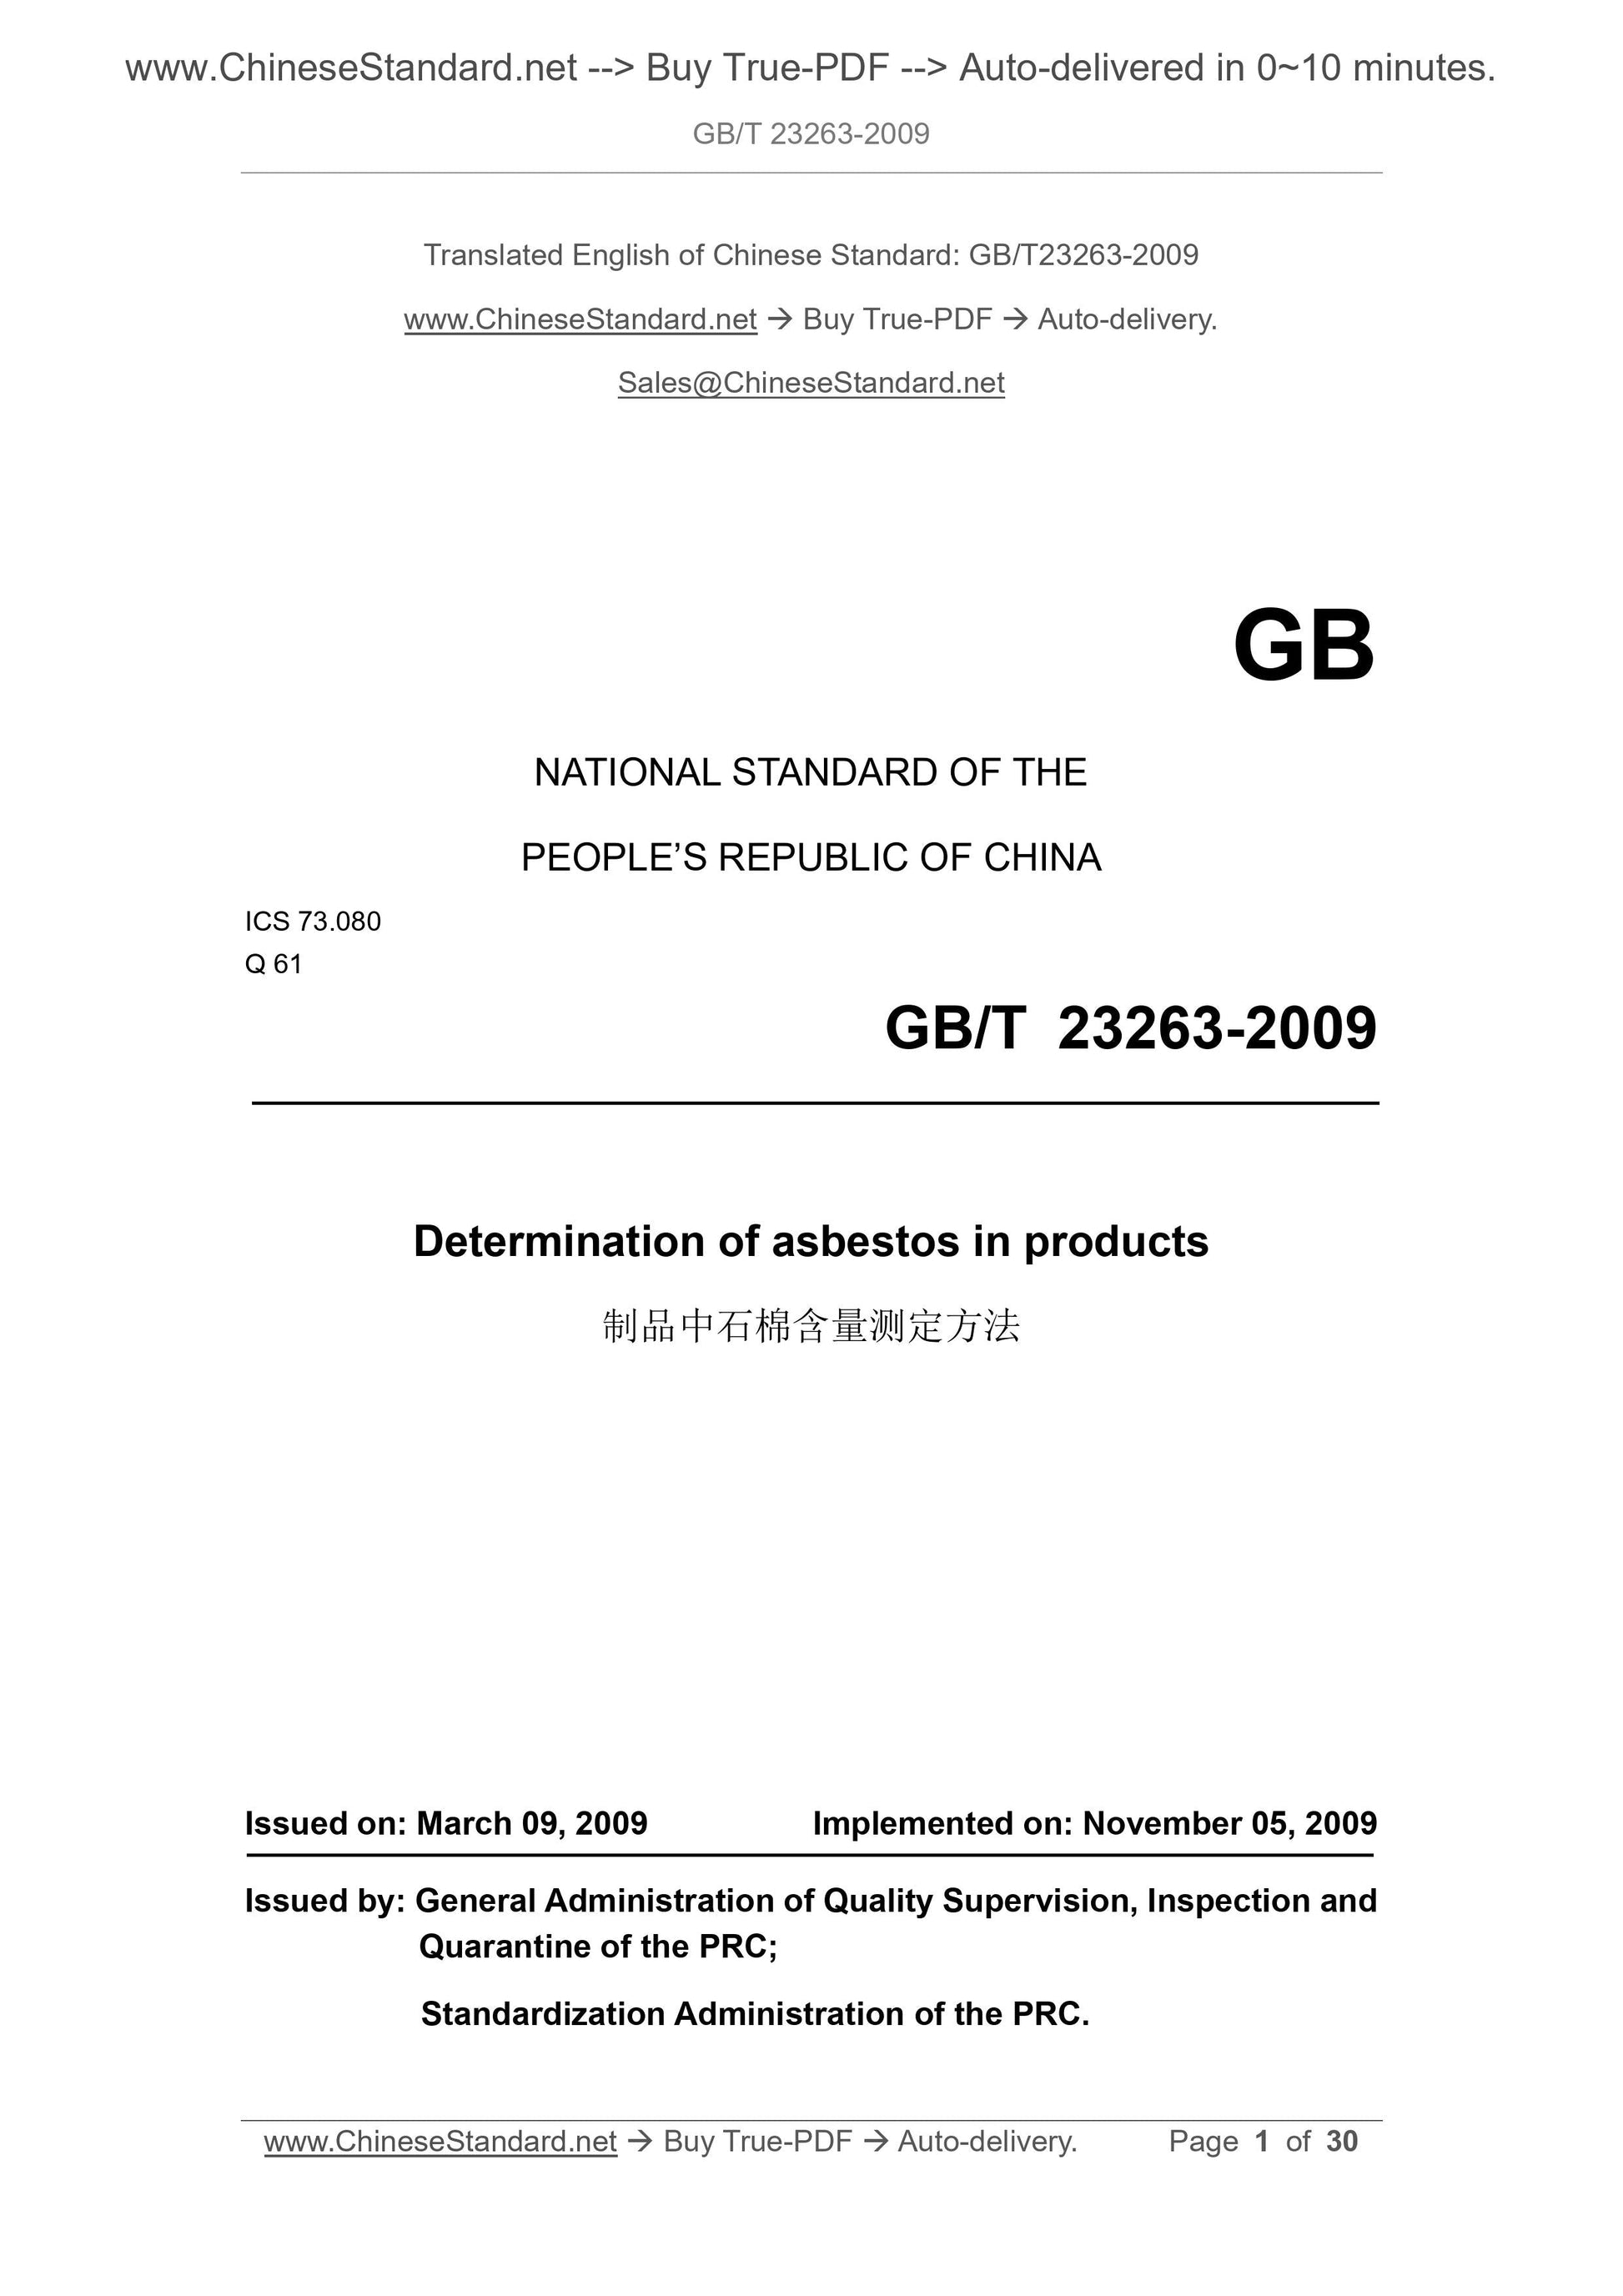 GB/T 23263-2009 Page 1